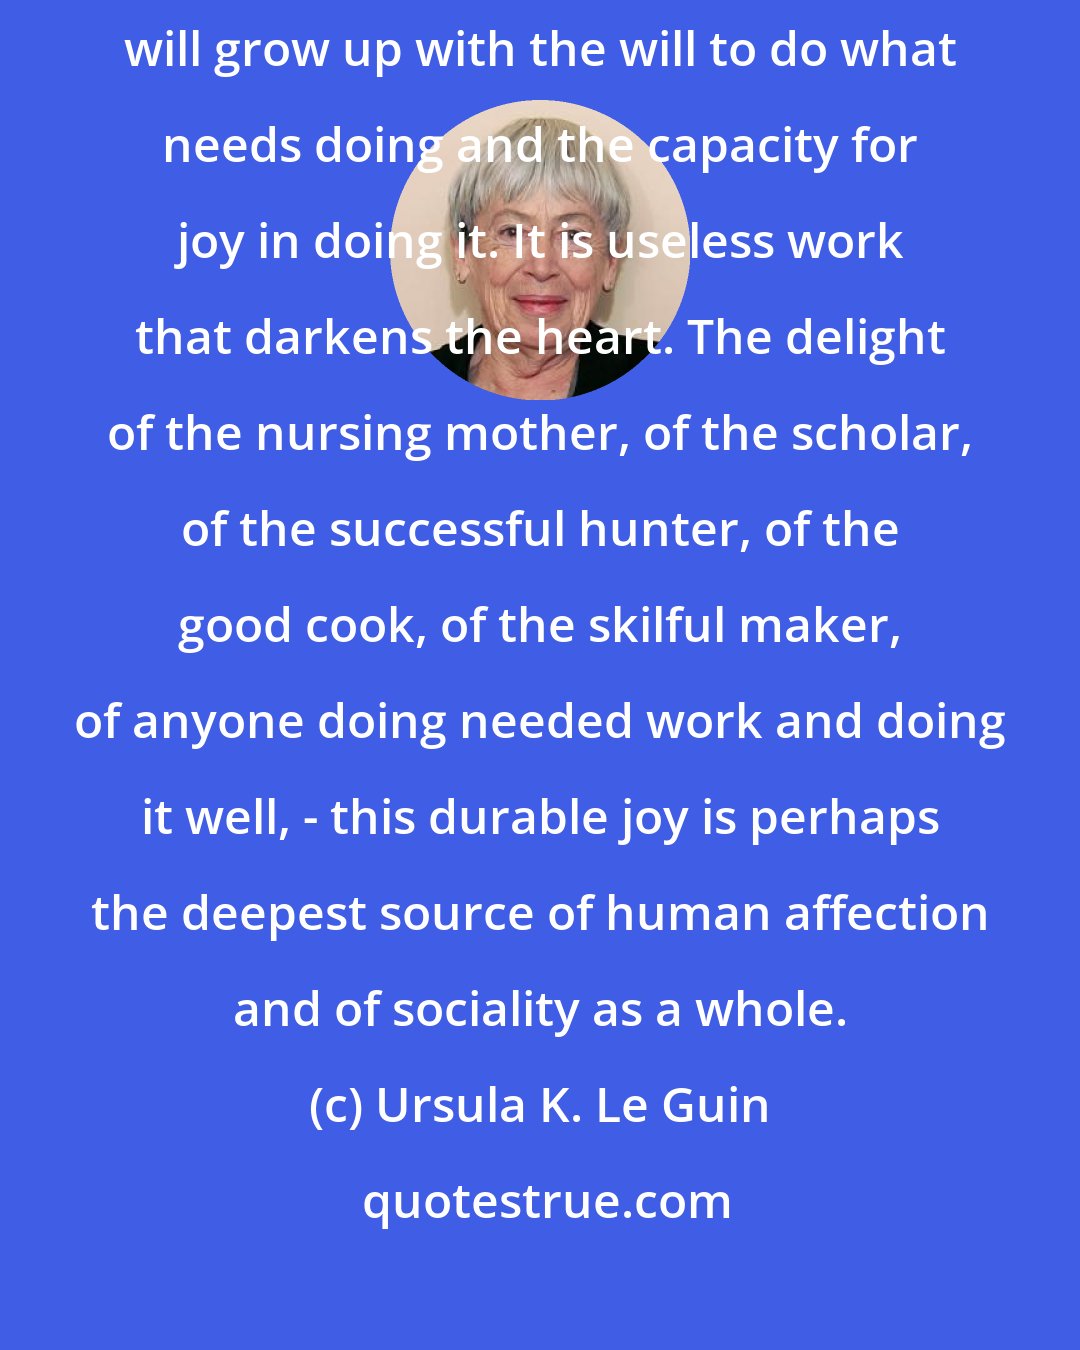 Ursula K. Le Guin: A child free from the guilt of ownership and the burden of economic competition will grow up with the will to do what needs doing and the capacity for joy in doing it. It is useless work that darkens the heart. The delight of the nursing mother, of the scholar, of the successful hunter, of the good cook, of the skilful maker, of anyone doing needed work and doing it well, - this durable joy is perhaps the deepest source of human affection and of sociality as a whole.